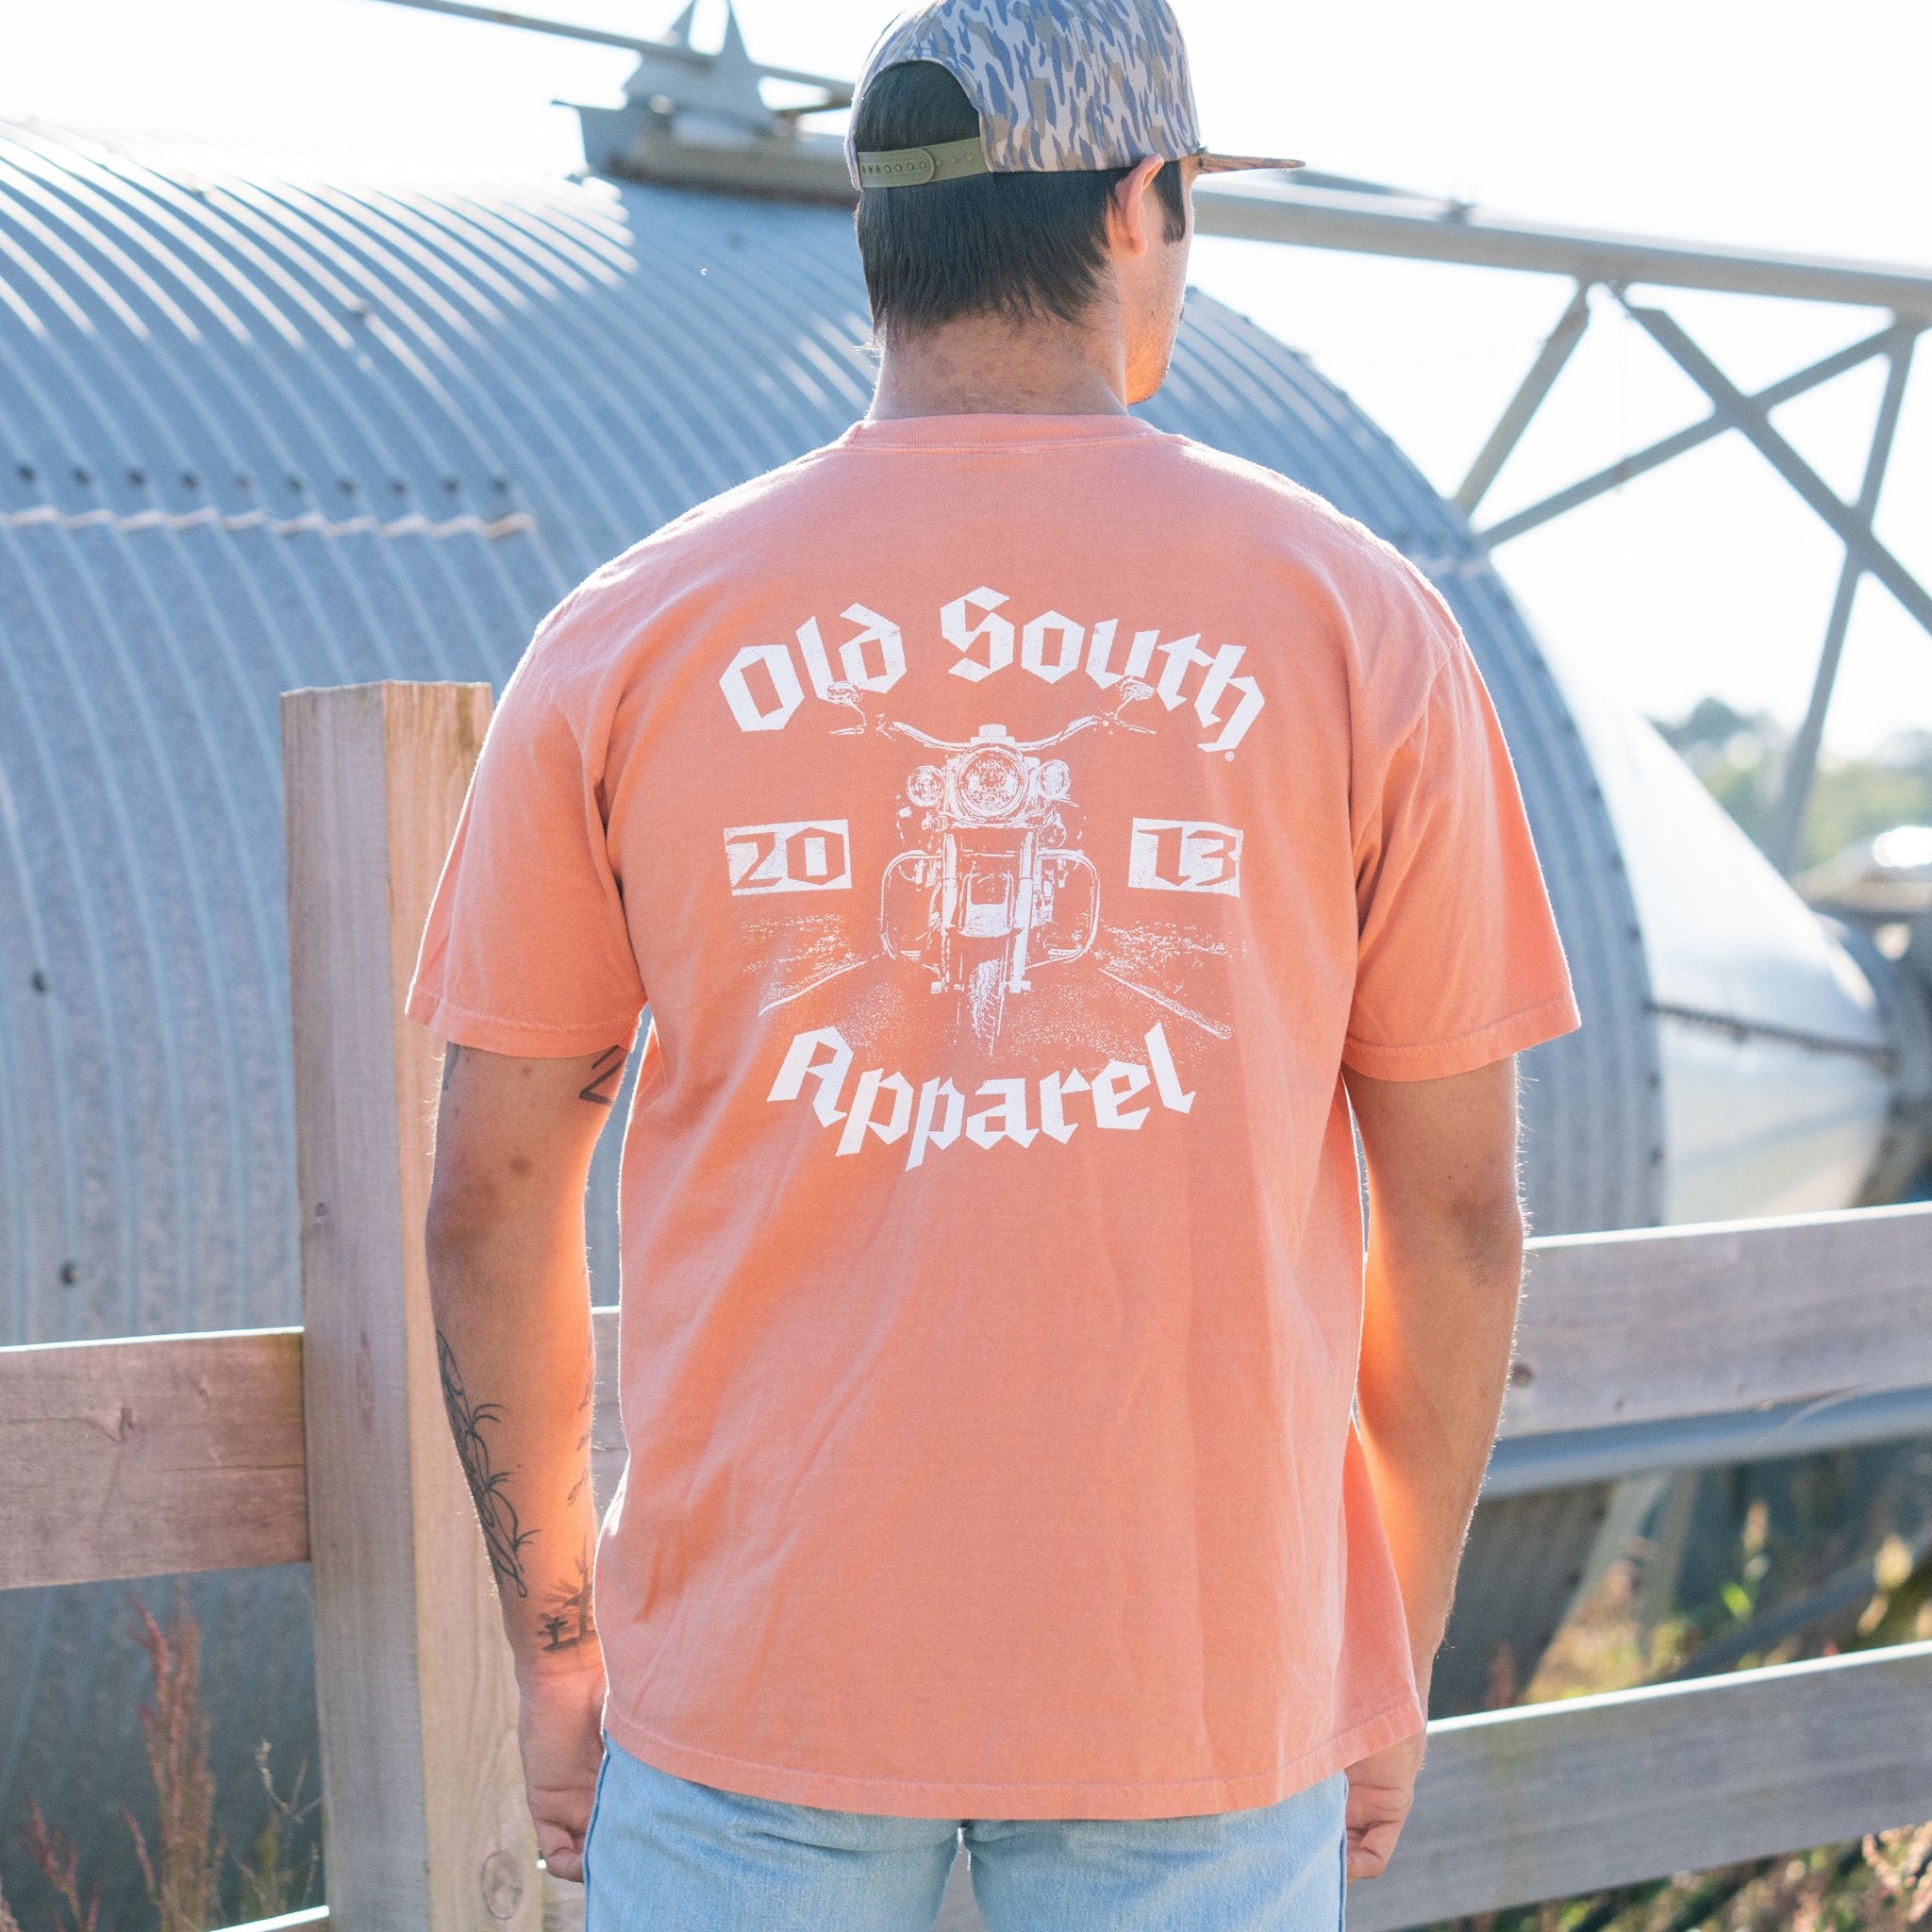 OldSouthApparel_Motorcycle - Short Sleeve